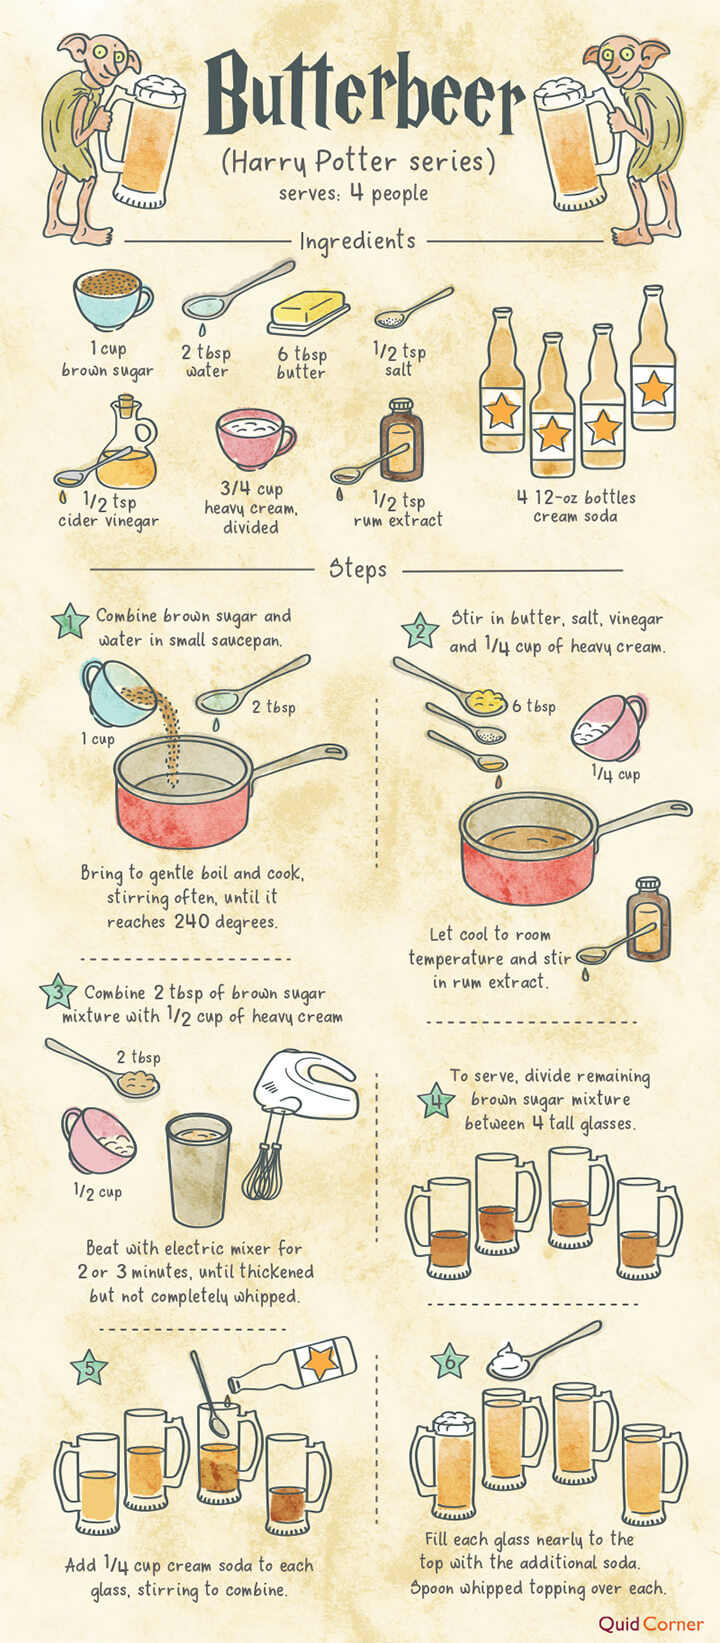 01-butterbeer-7-real-recipes-from-famous-novels2018-06-05-08-17-54